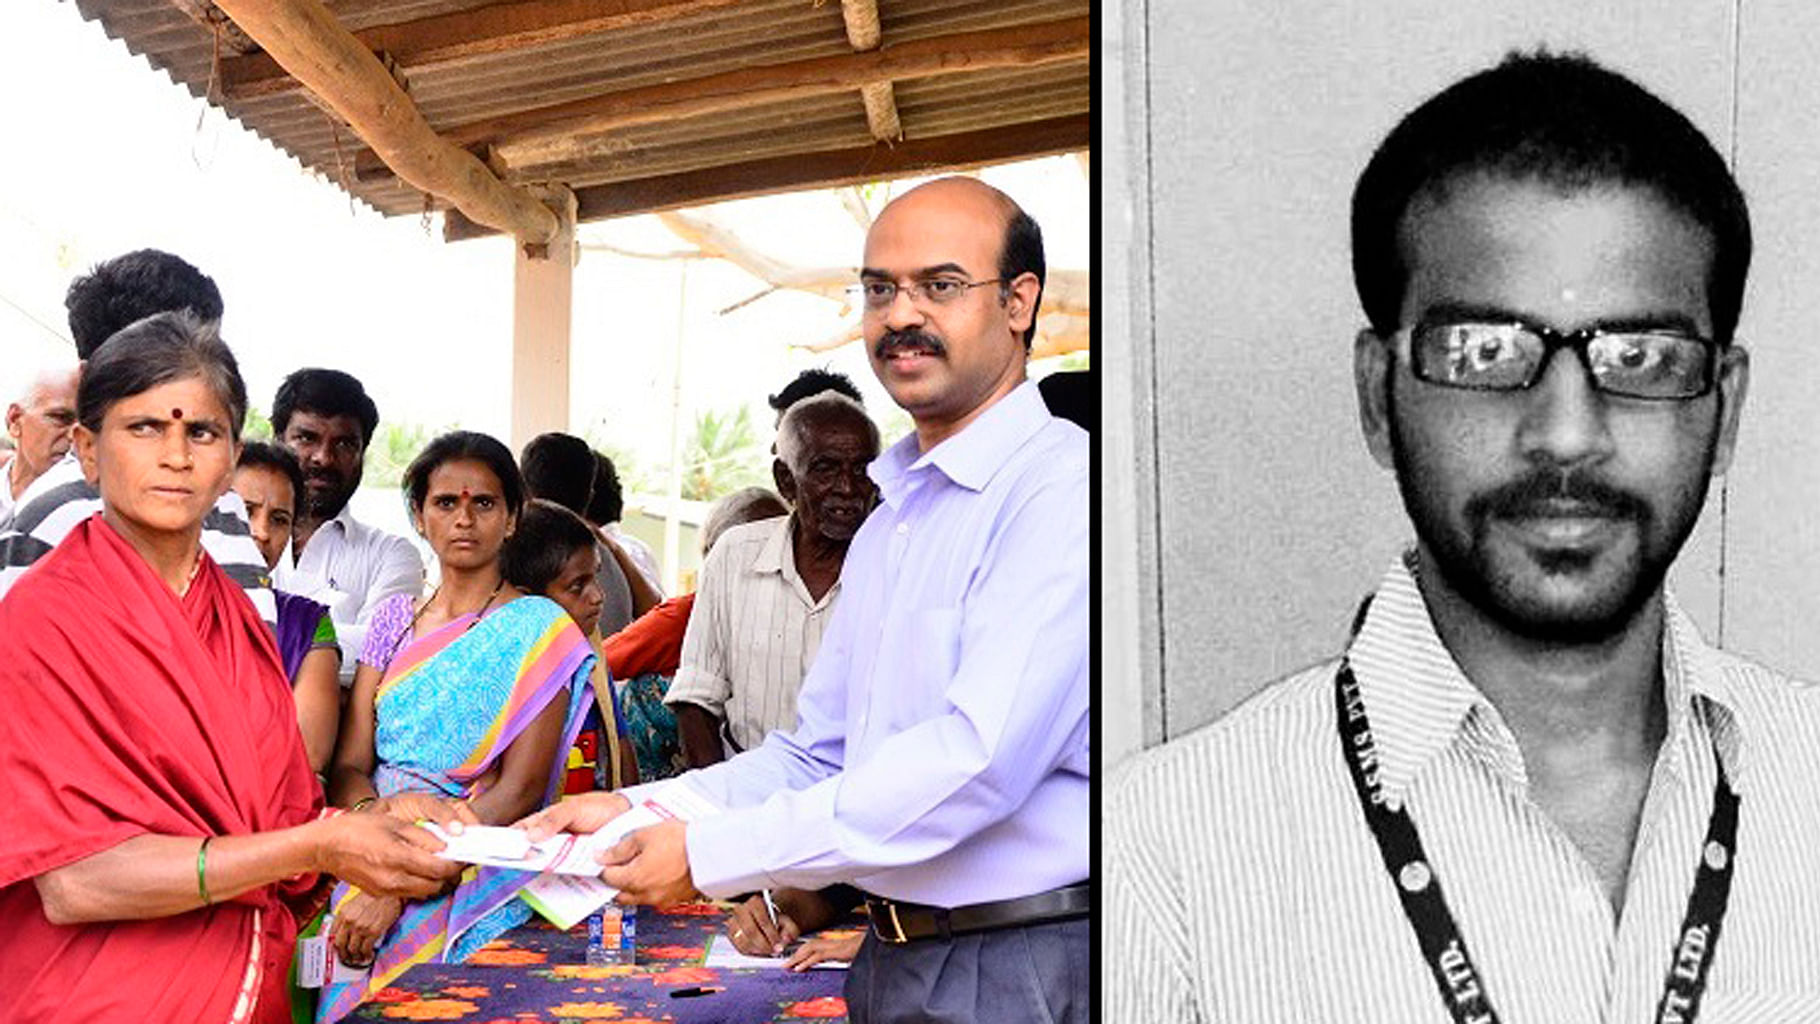 Geethamma, Harish’s mother (Left), Harish Nanjappa (Right) who donated his eyes minutes before he died. (Photo Courtesy: <i>The News Minute</i>)